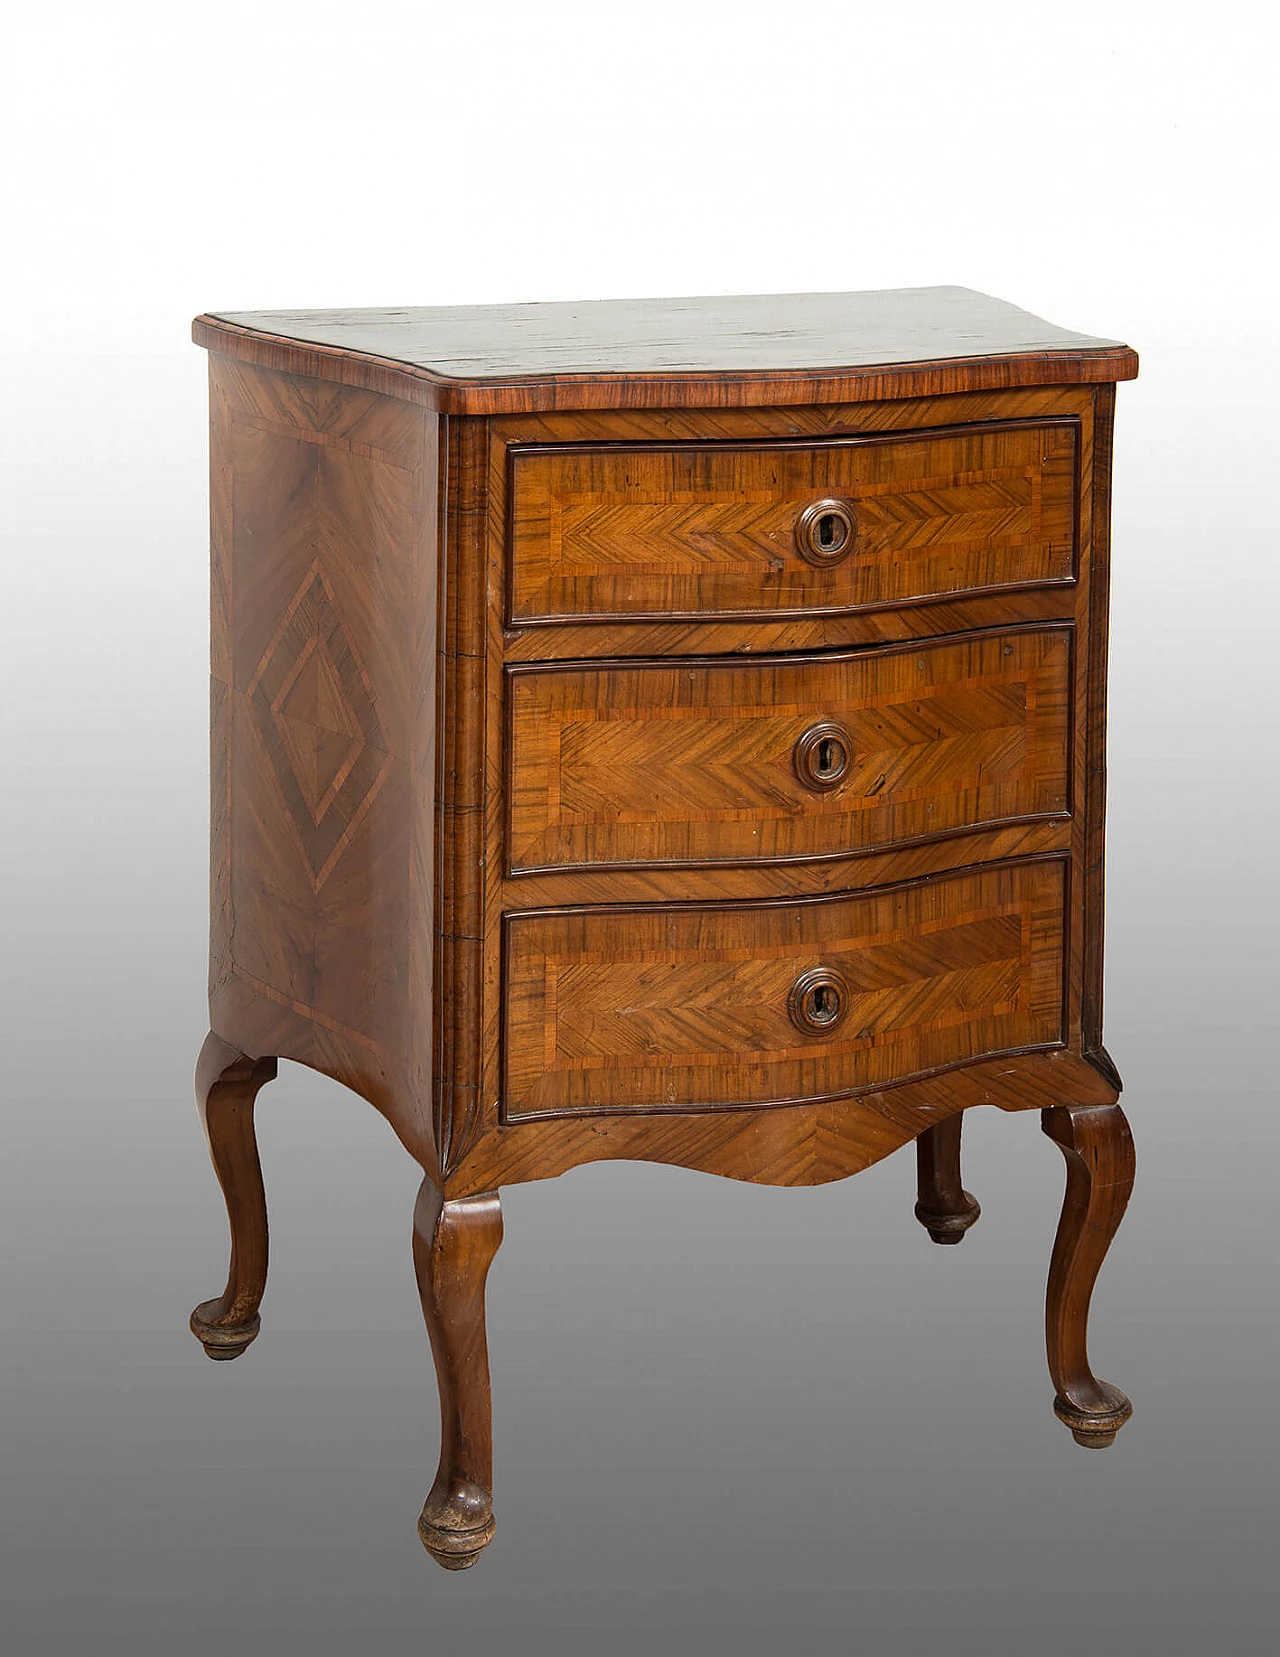 Neapolitan Louis XIV walnut-root bedside table with inlays, 18th century 1